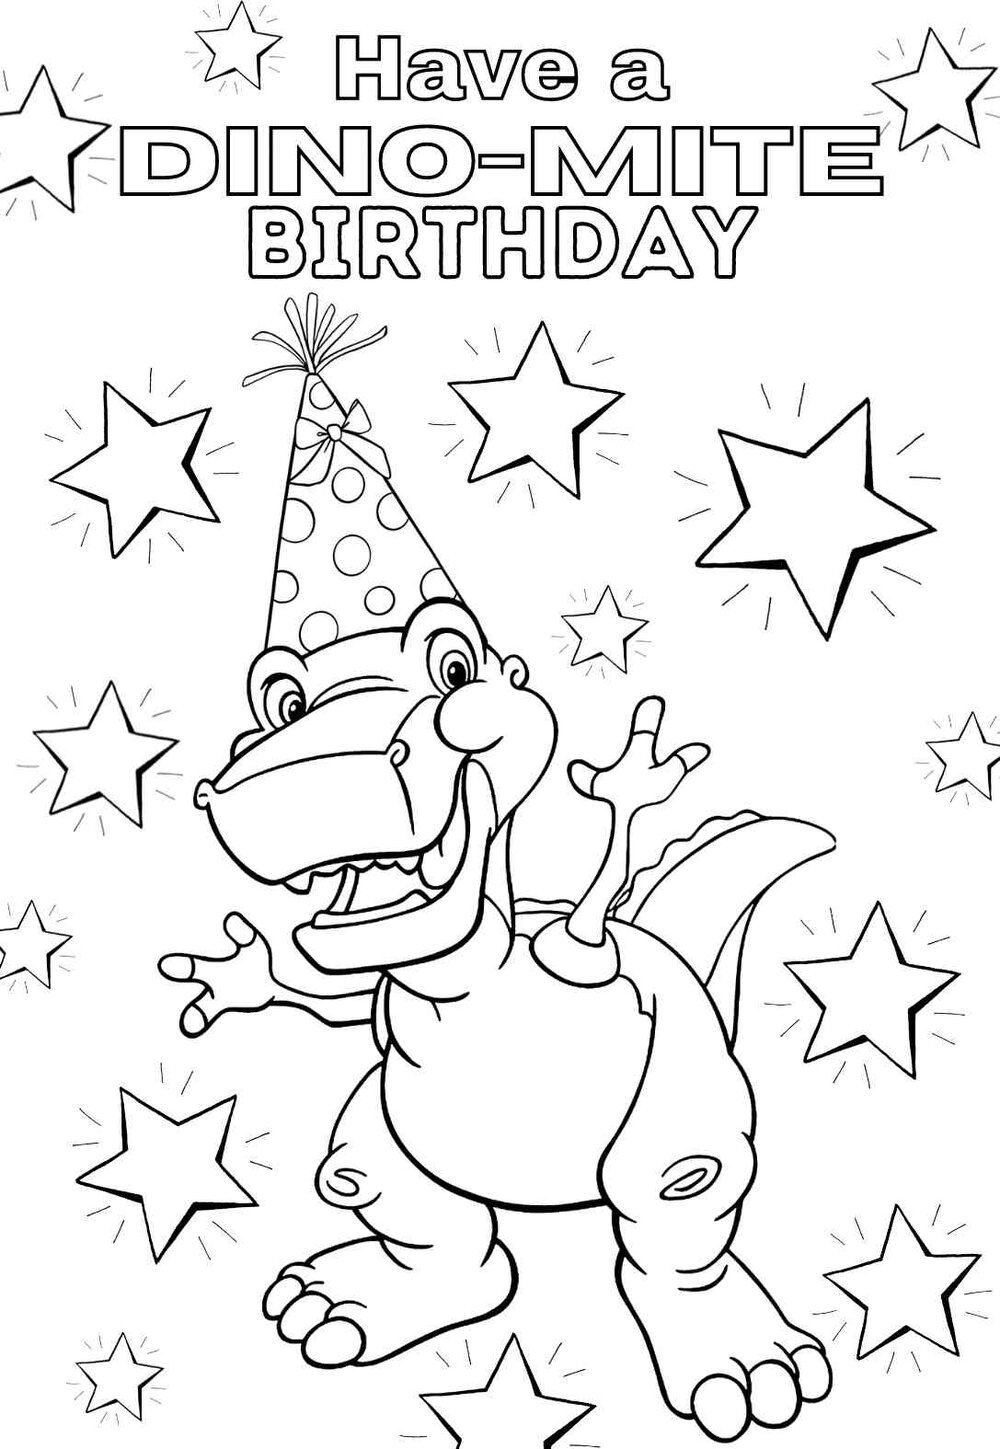 10 gnarly dinosaur birthday coloring pages cards free printbirthday cards